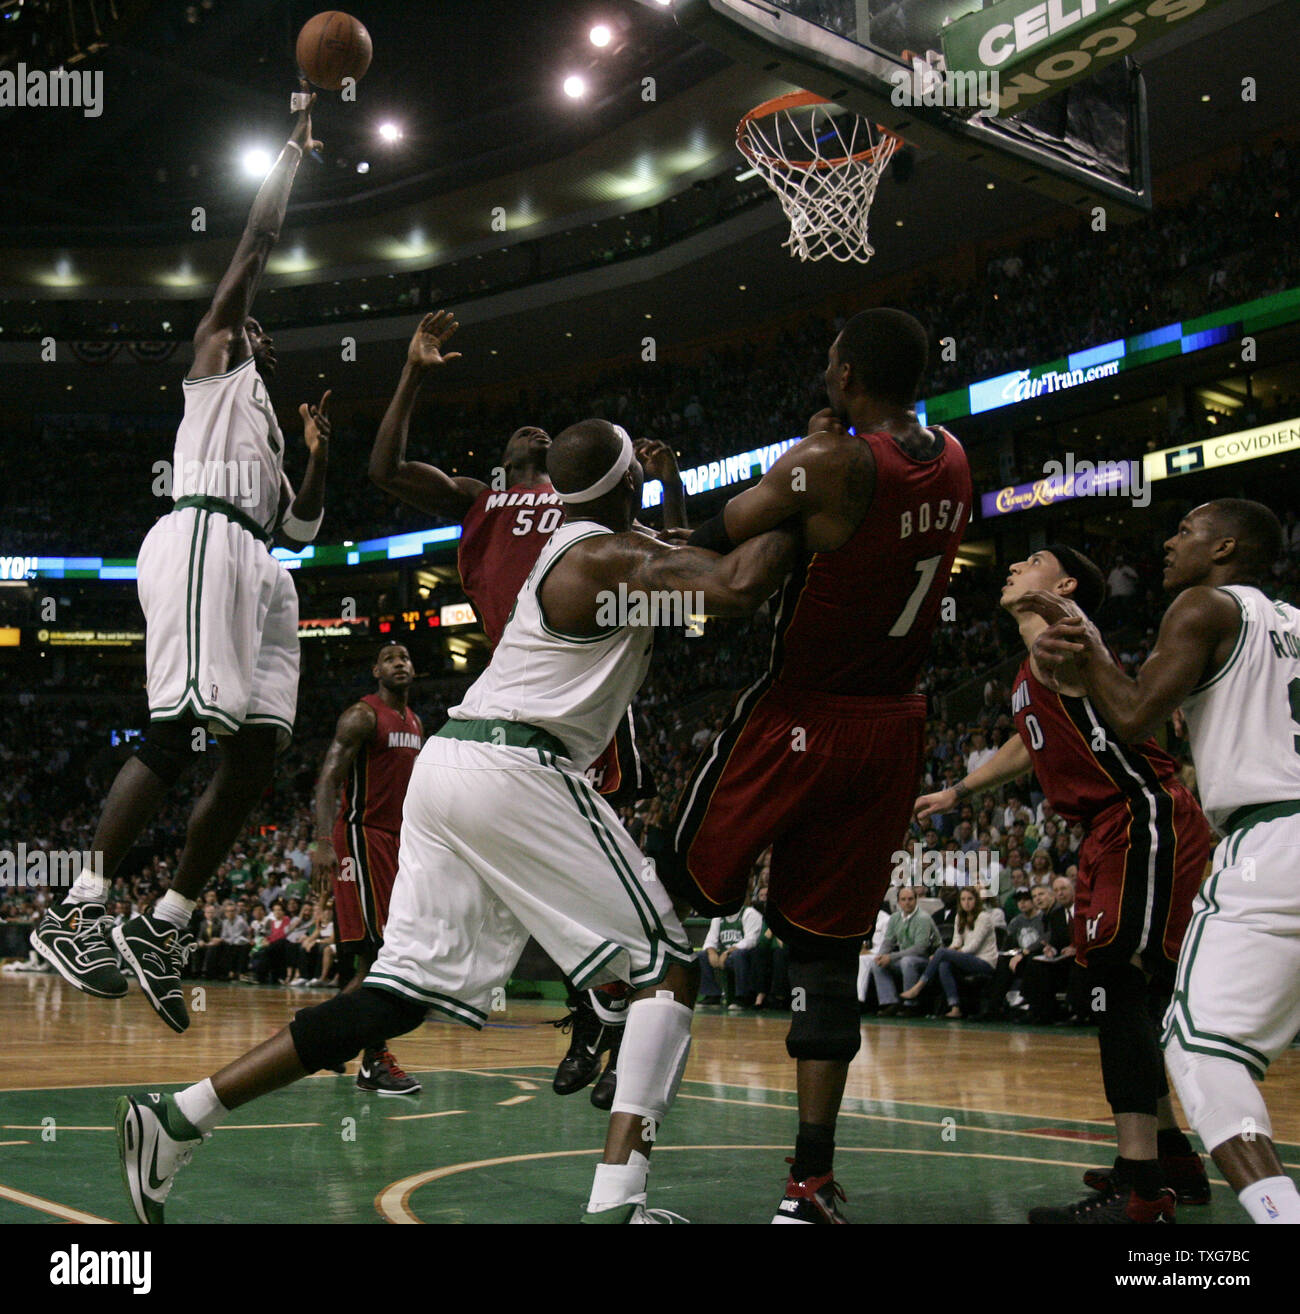 Boston Celtics forward Kevin Garnett (L) goes up for two points against the Miami Heat in the second half of the Eastern Conference Semifinals at the TD Garden in Boston, Massachusetts on May 7, 2011.   UPI/Matthew Healey Stock Photo